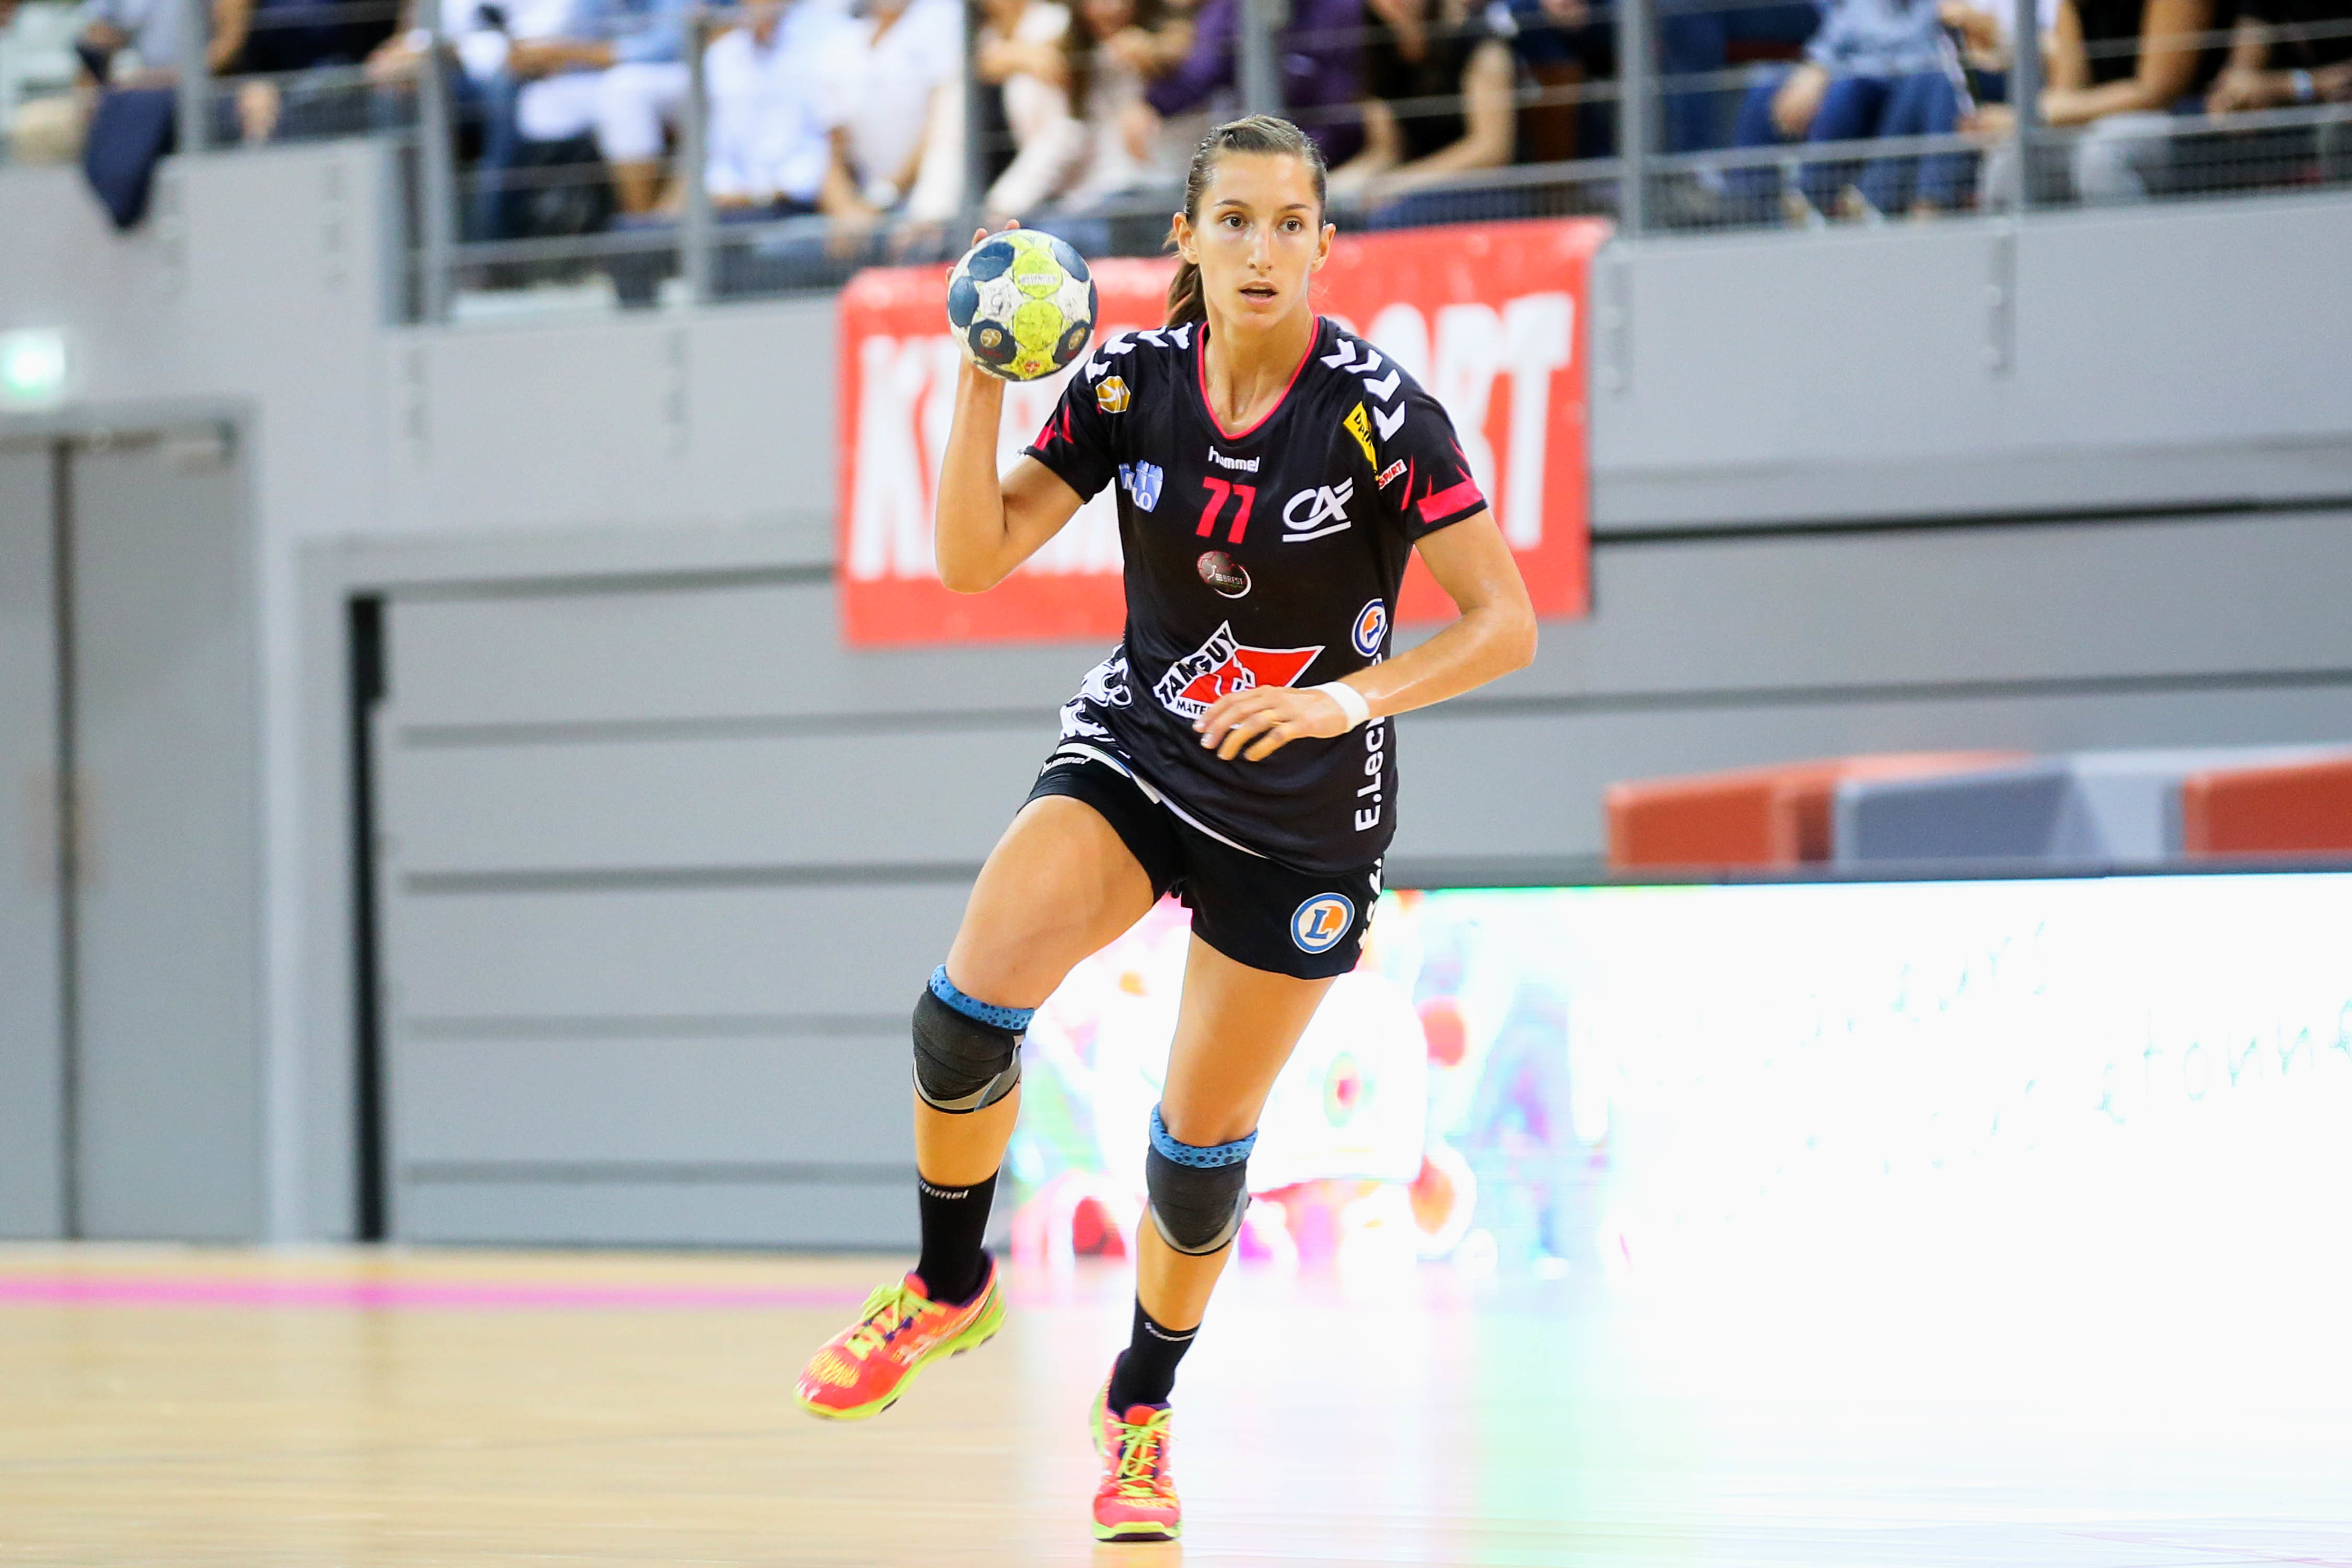 Marion Limal of Brest  during the women handball league match between Brest and Nice on 14 september 2016 in Brest, France